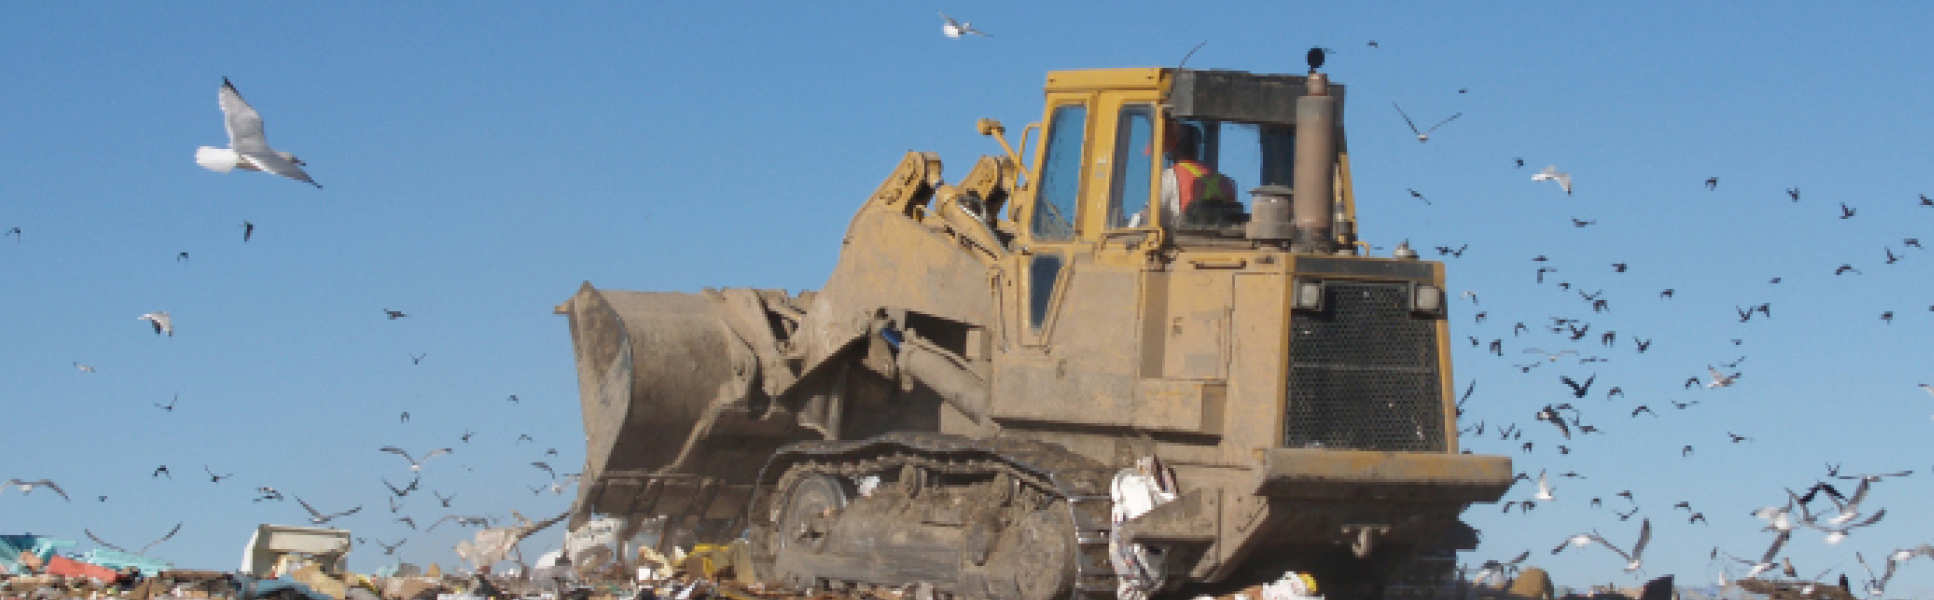 A digger on a landfill site